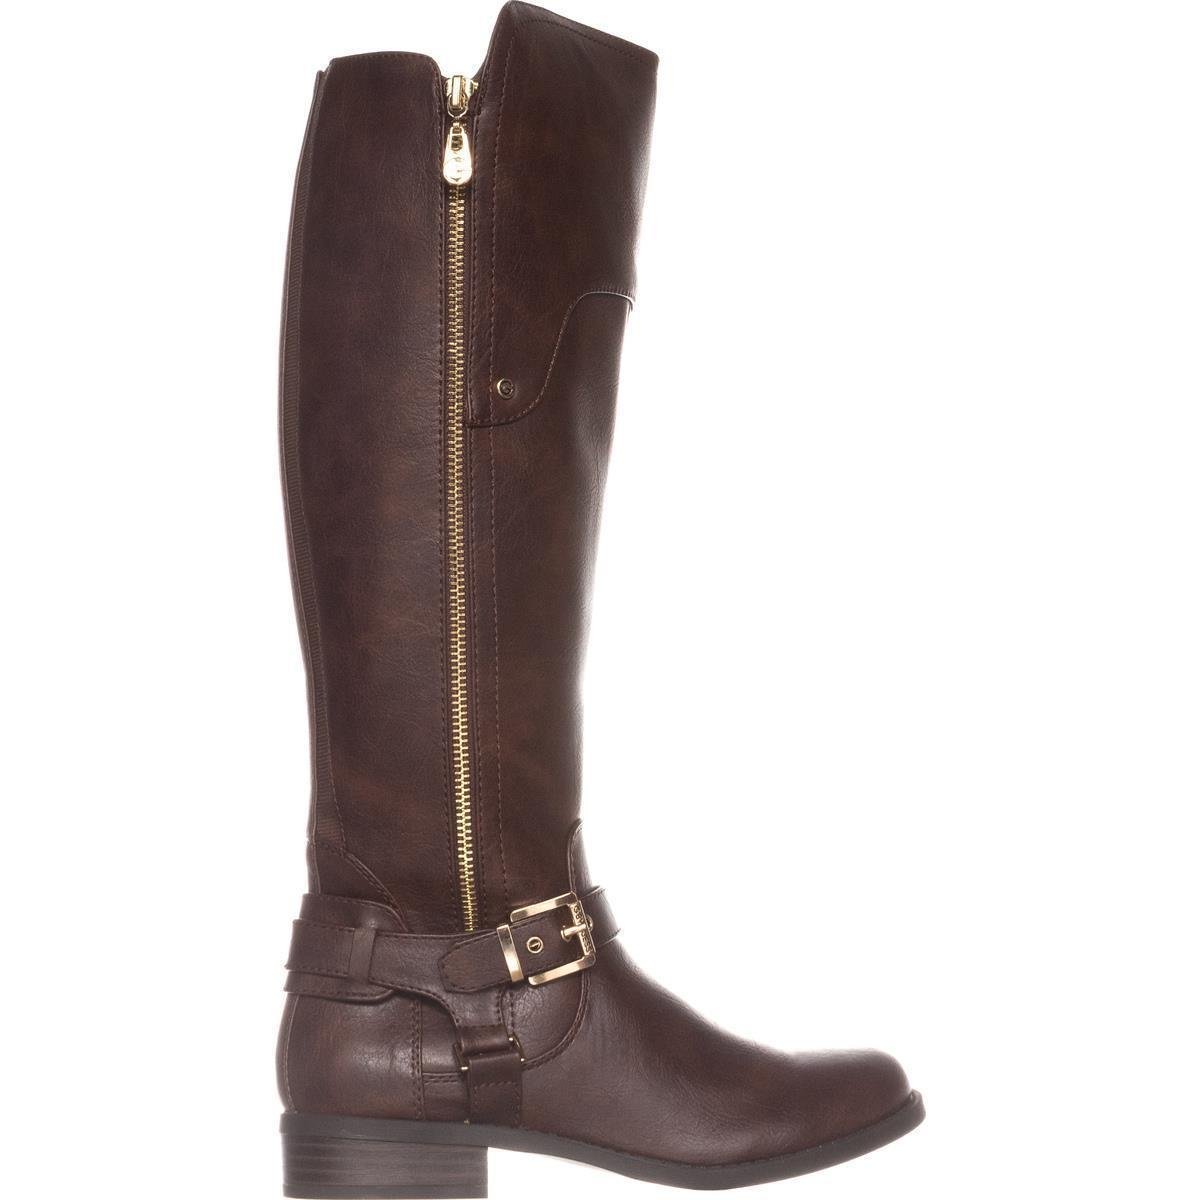 G by Guess Womens Harson5 Closed Toe Knee High Fashion Boots, Brown ...